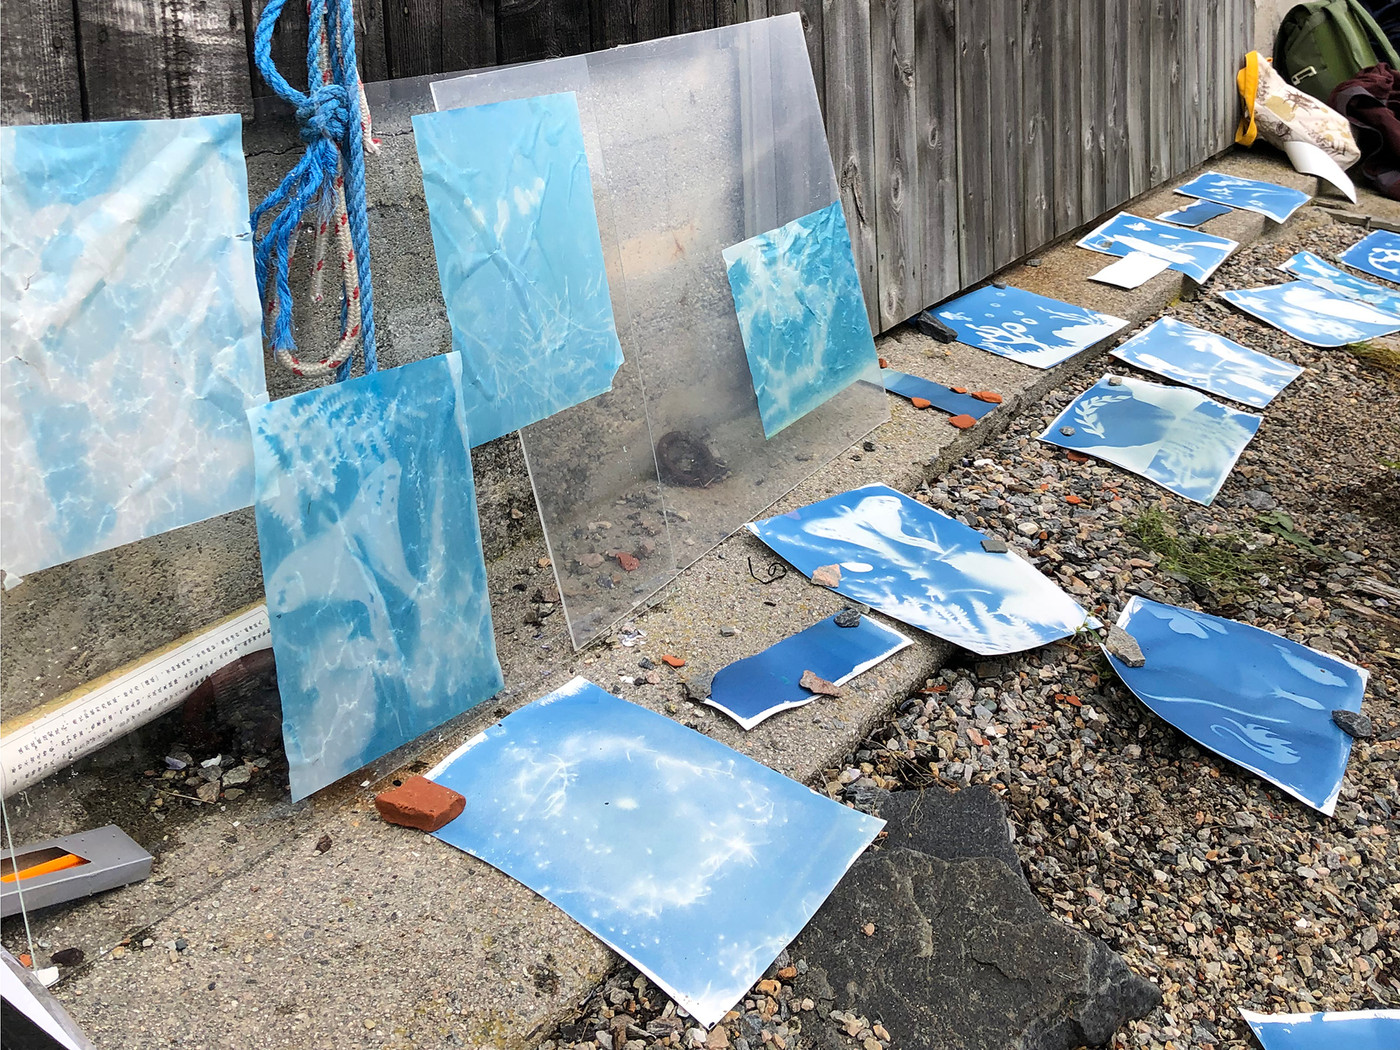 A colour photo of around twenty cyanotypes laying outside on the ground and an a fence.